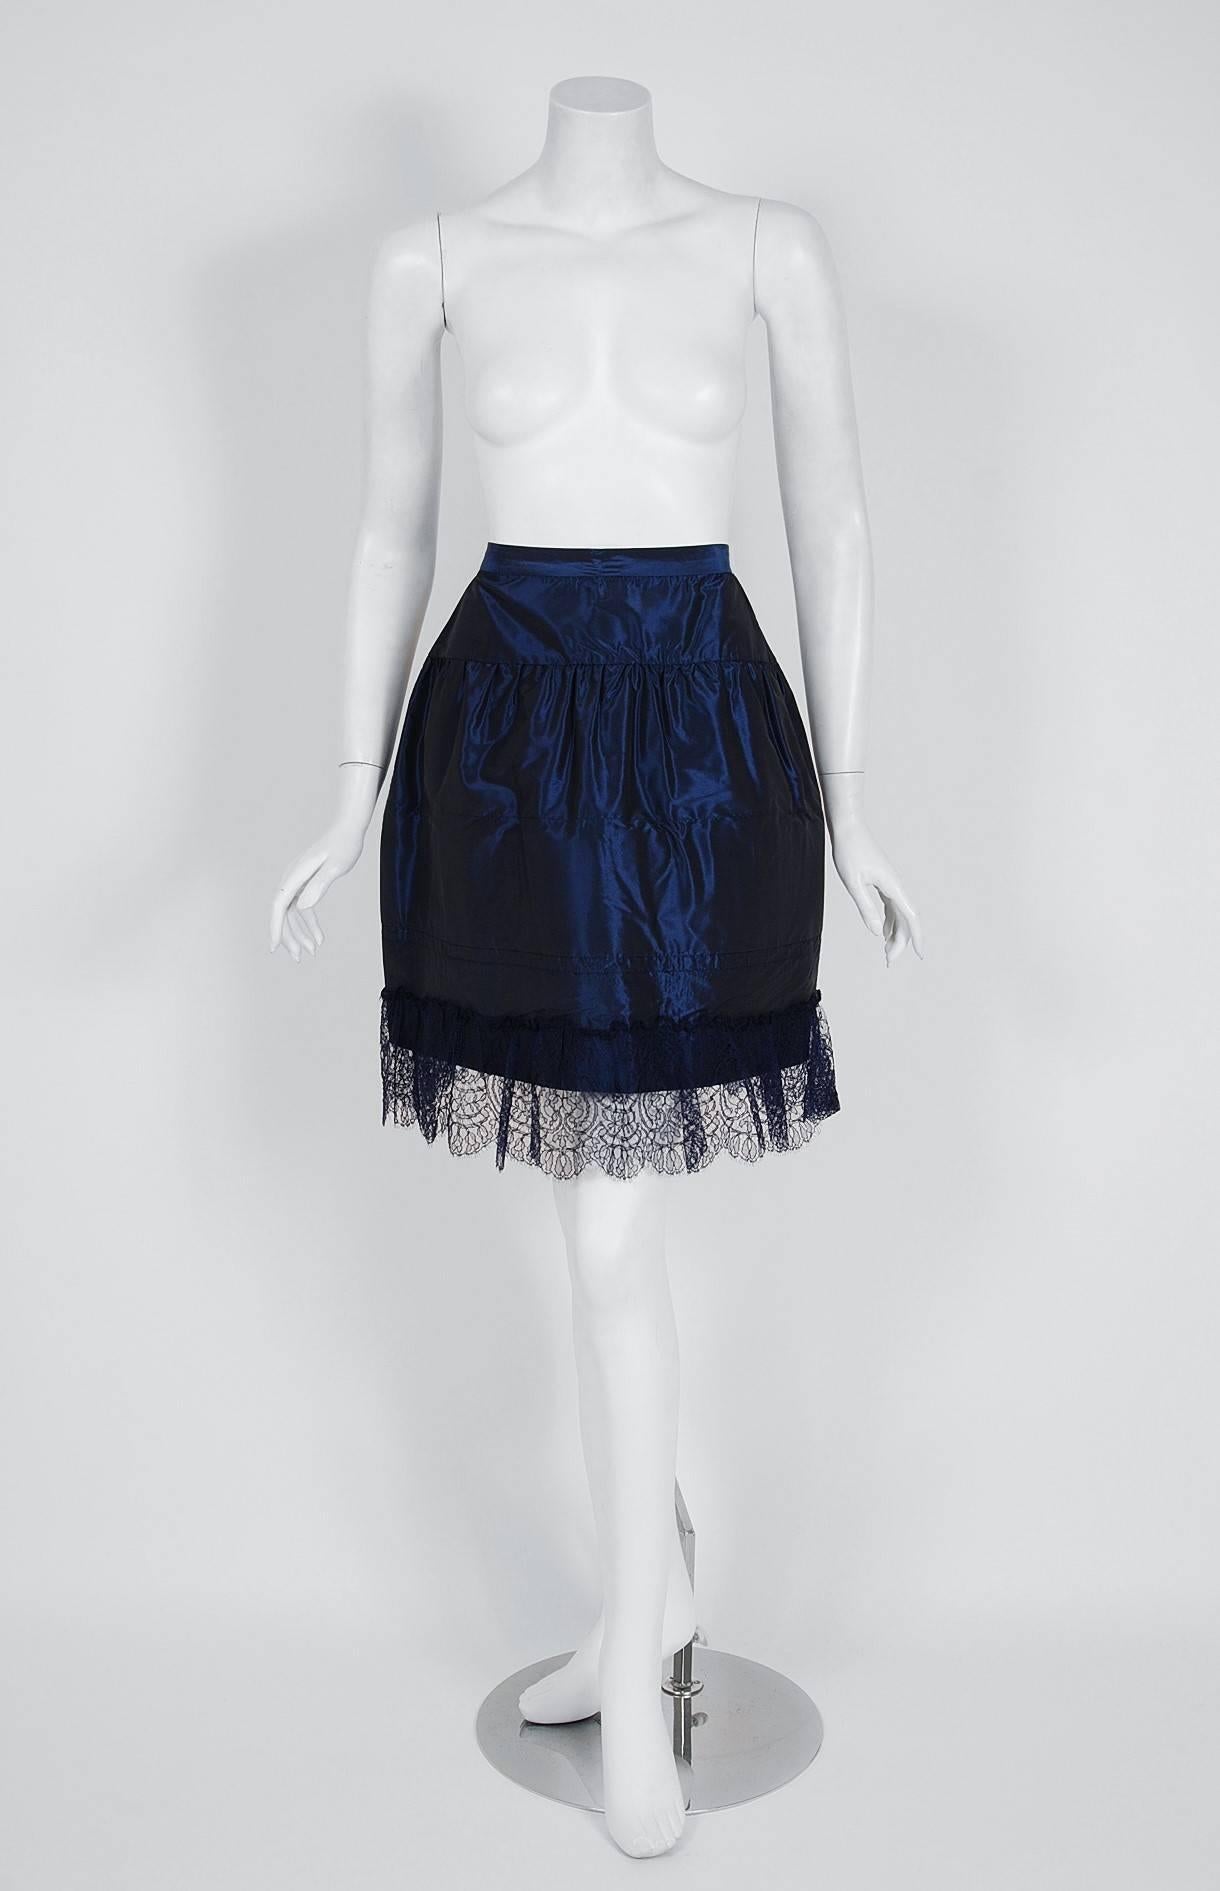 Women's 1987 Chanel Runway Navy-Blue Sequin Satin & Chantilly-Lace Cocktail Mini Dress